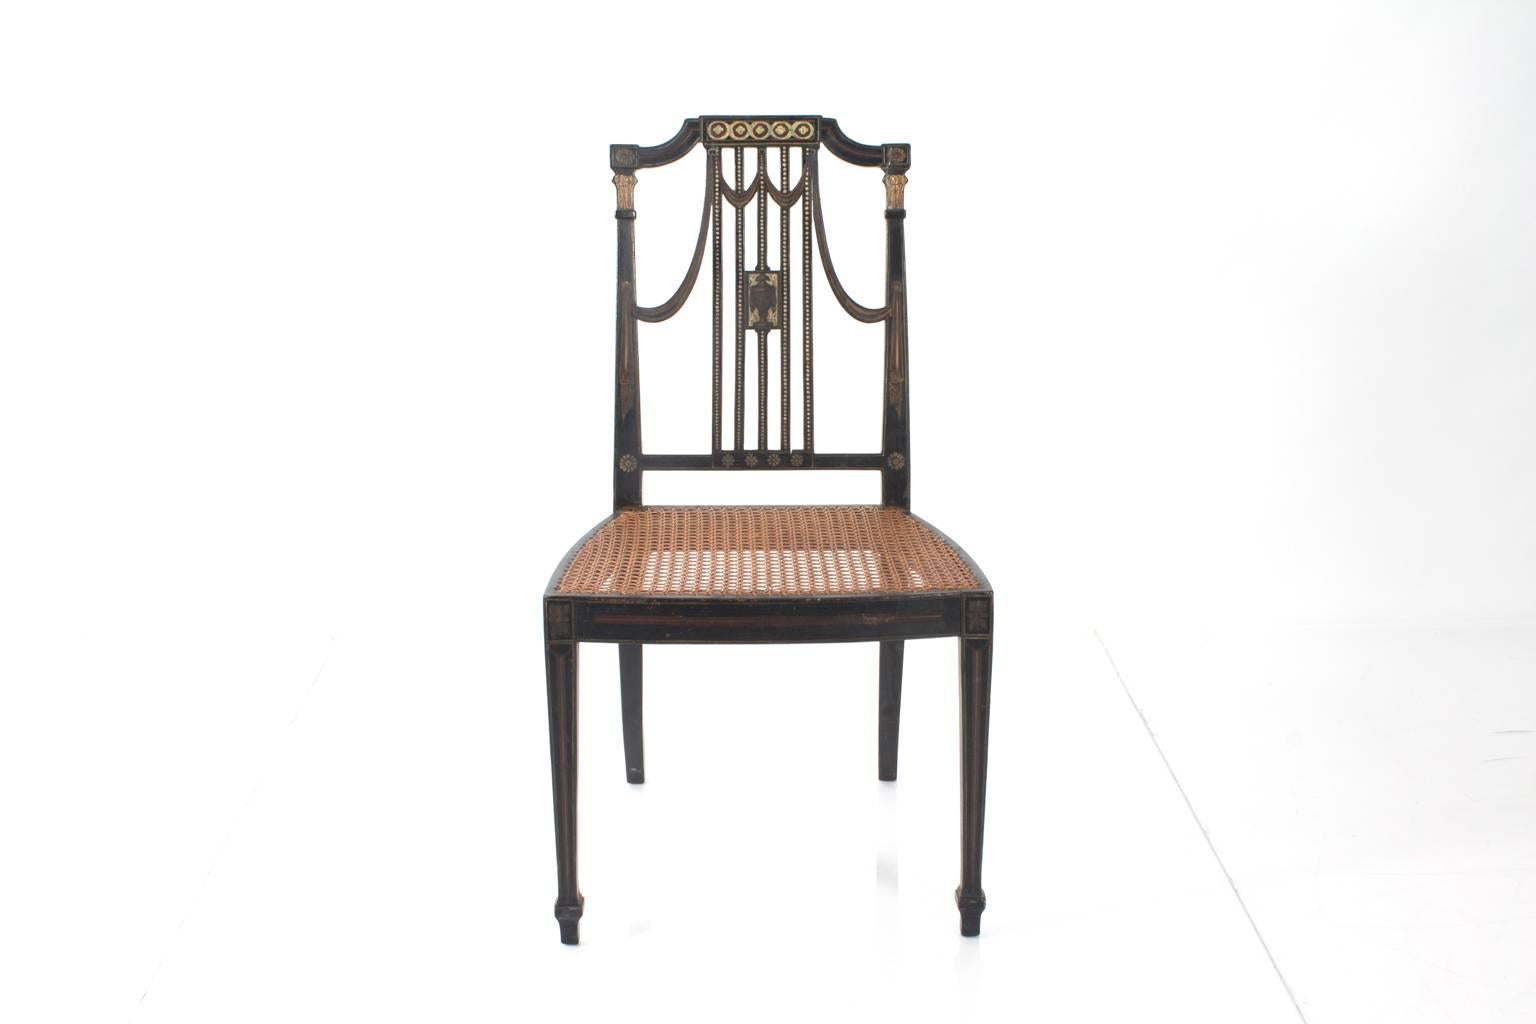 Pair of 19th century, Adams style chairs with caned seats. Ebonized with gilt Grecian designs.